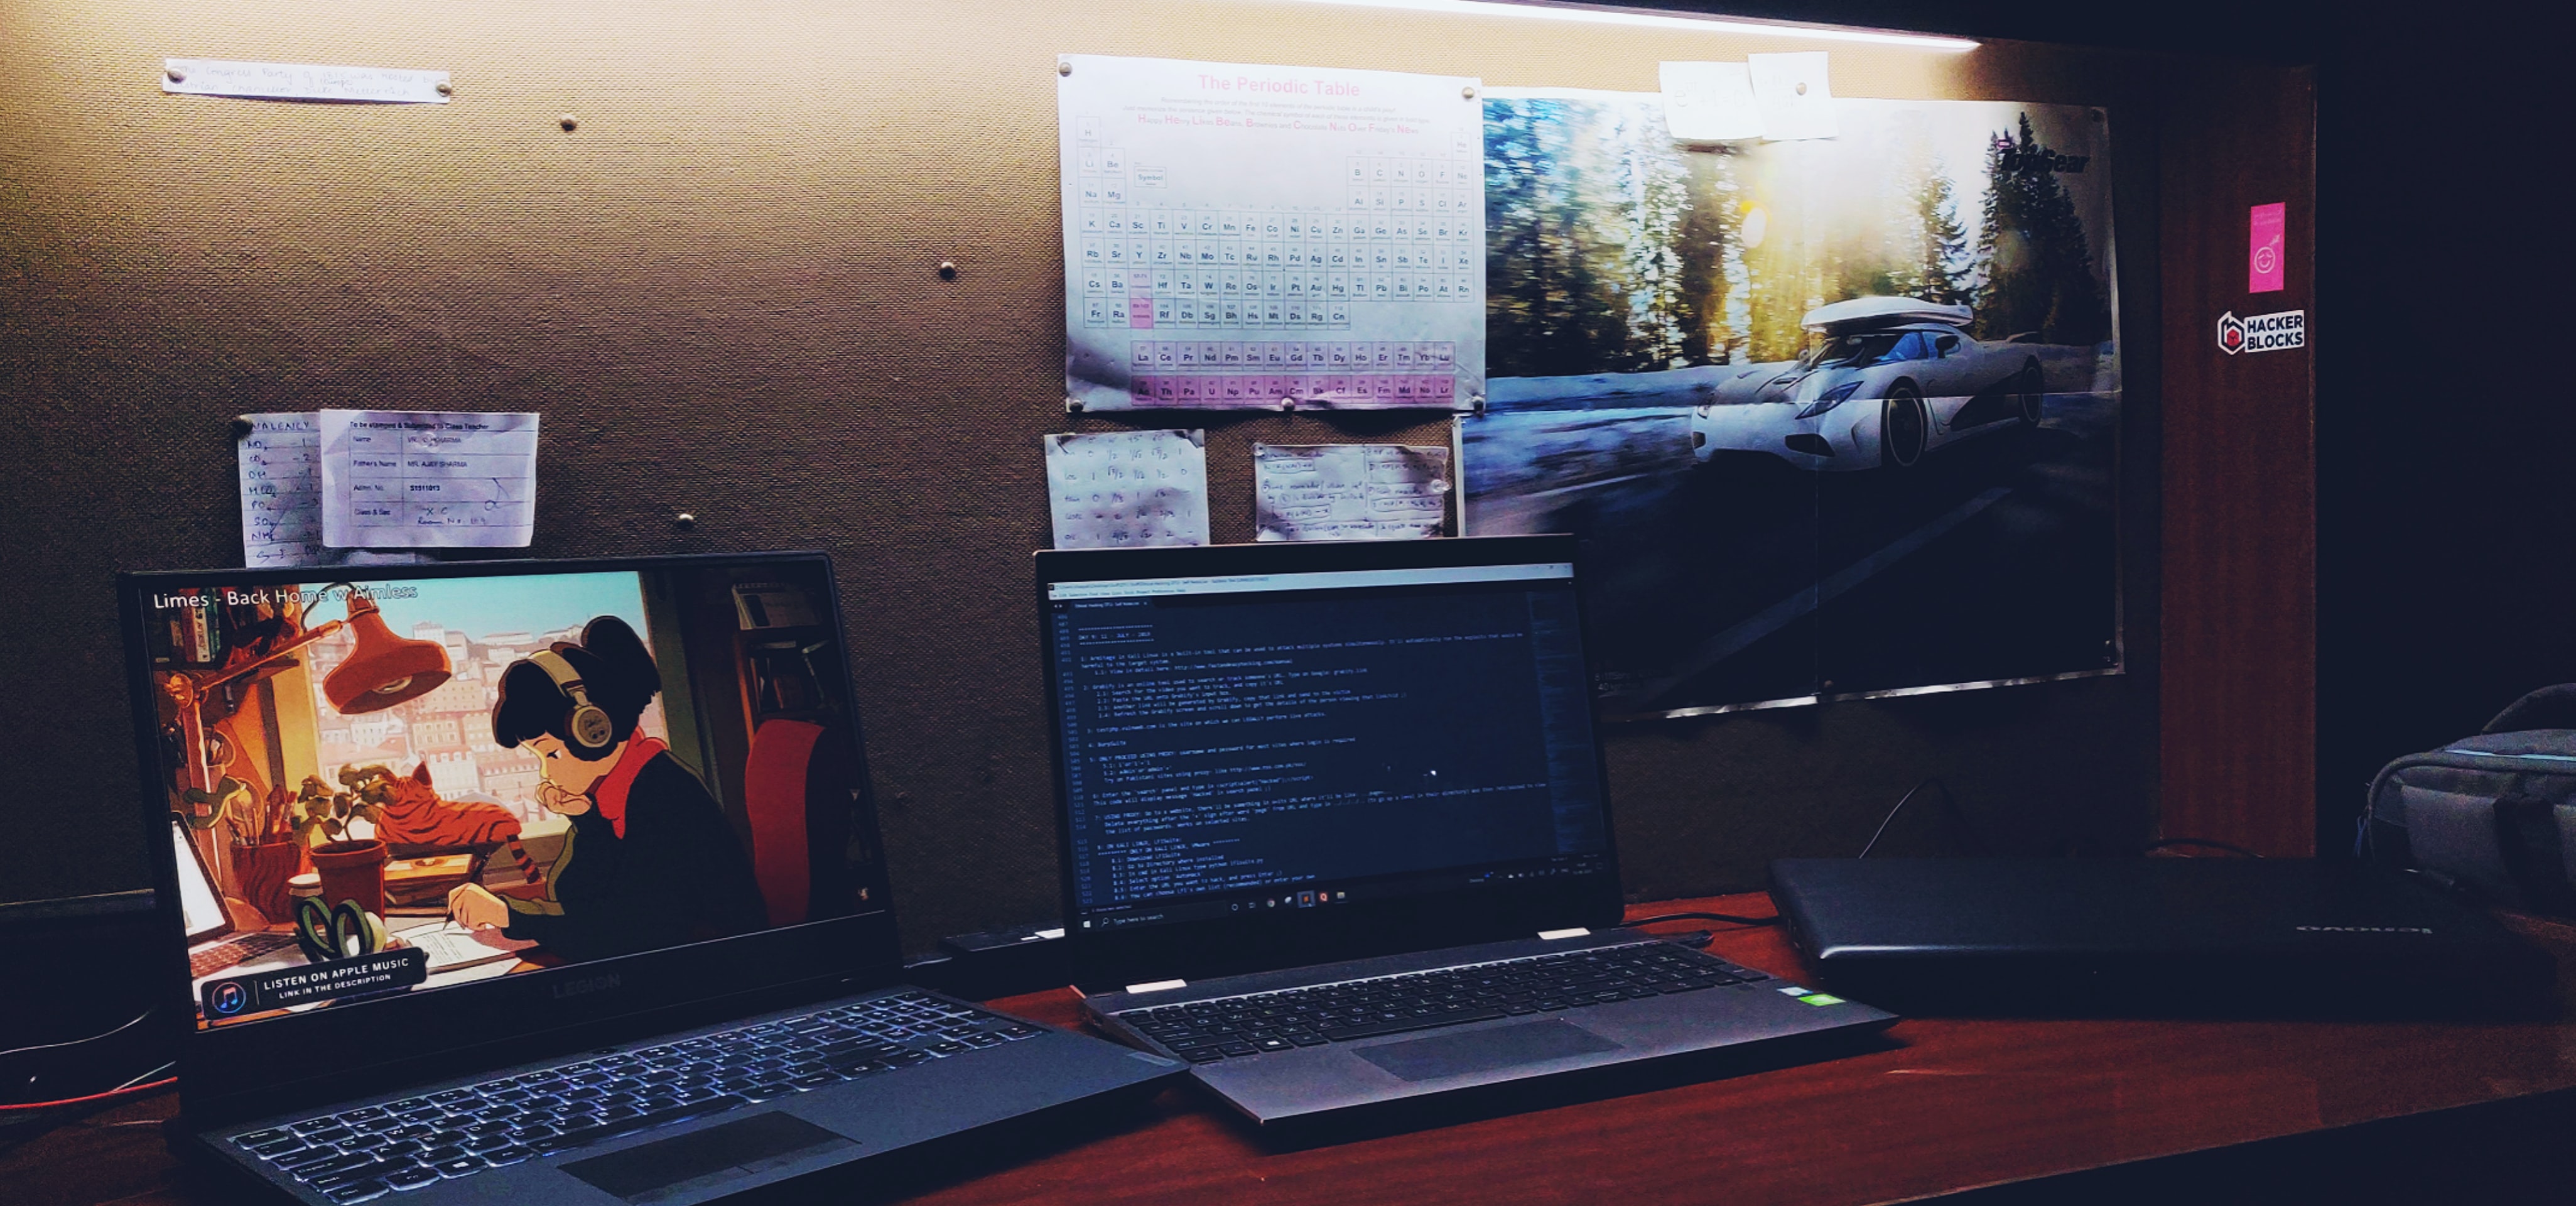 A dimmed desk environment with the LoFi girl featured alongside an open code editor